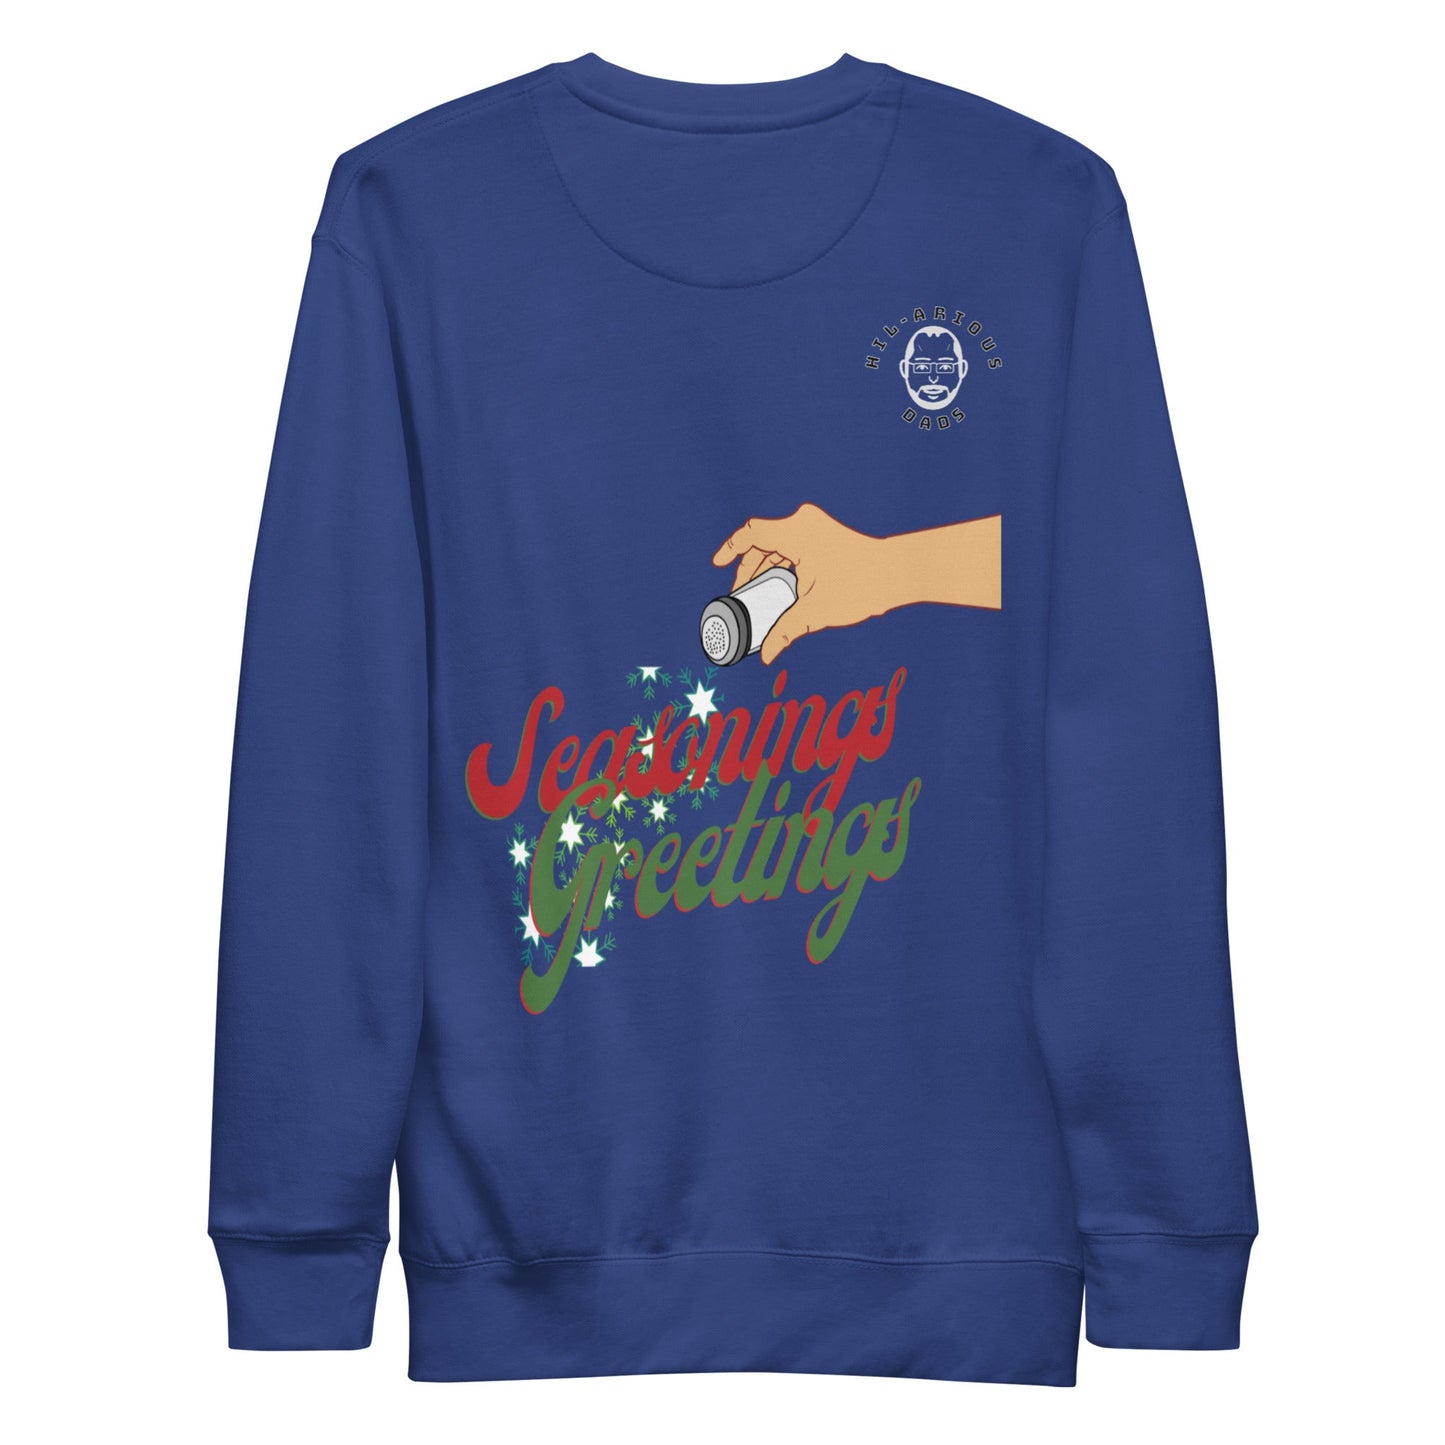 What did the salt say to the pepper on Christmas?-Sweatshirt - Hil-arious Dads